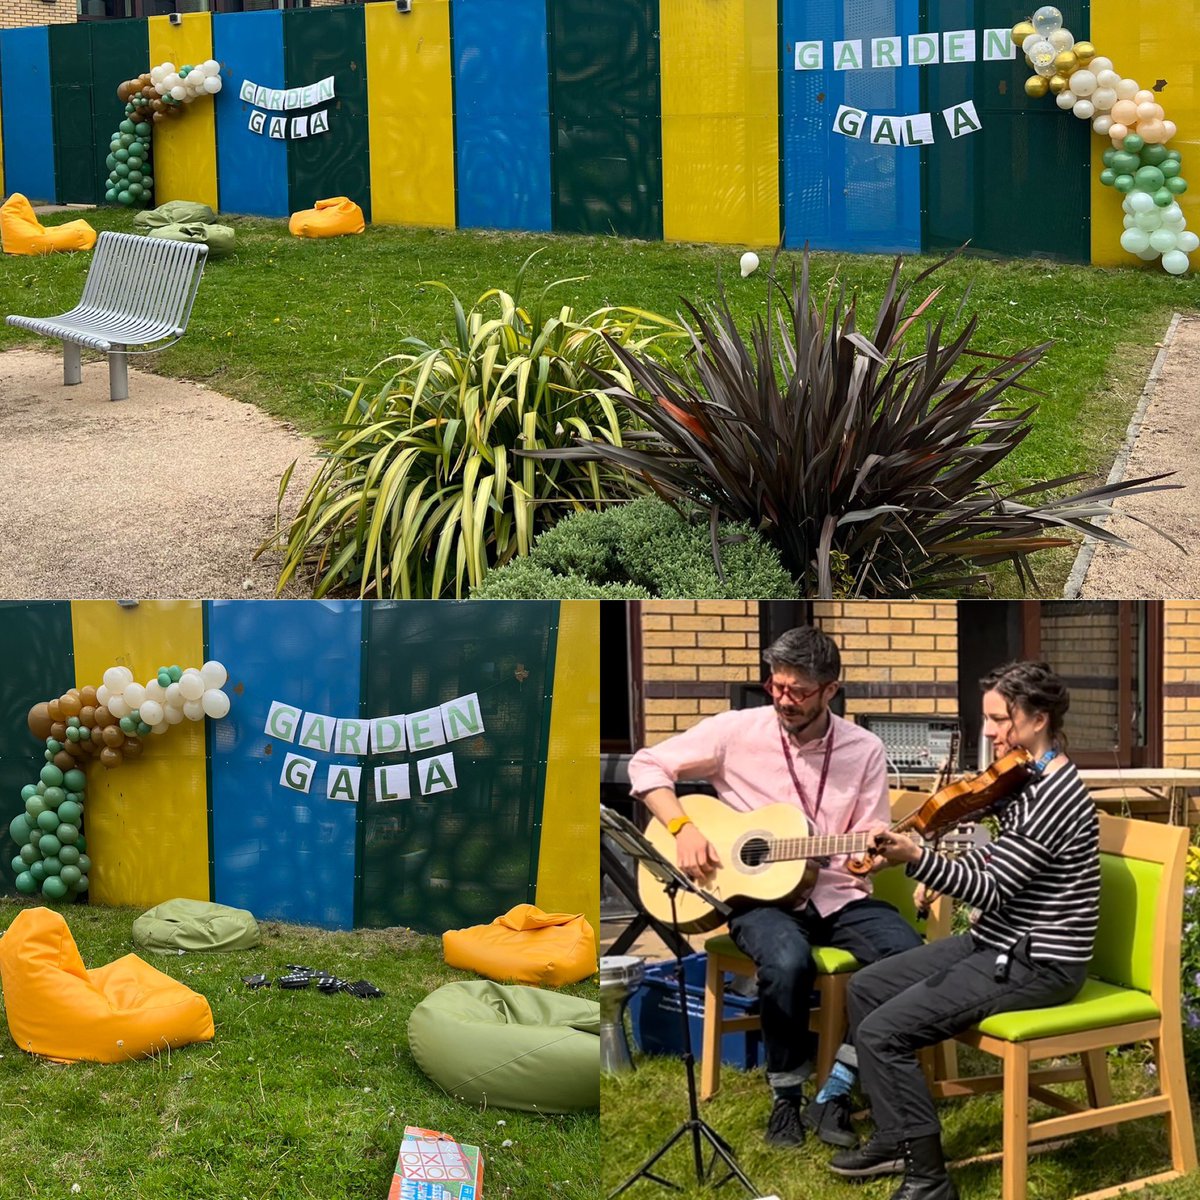 Reflecting back on last weeks fantastic Garden Gala 🌿⭐️ Huge thanks to @OatesKeely for organising. Amazing turn out from across the unit, with plenty of laughs & fun. Thanks to our fab Music Therapist, Joe, & our psychologist/ violinist @Vivielemon #TakeALookAtMeadowbrook